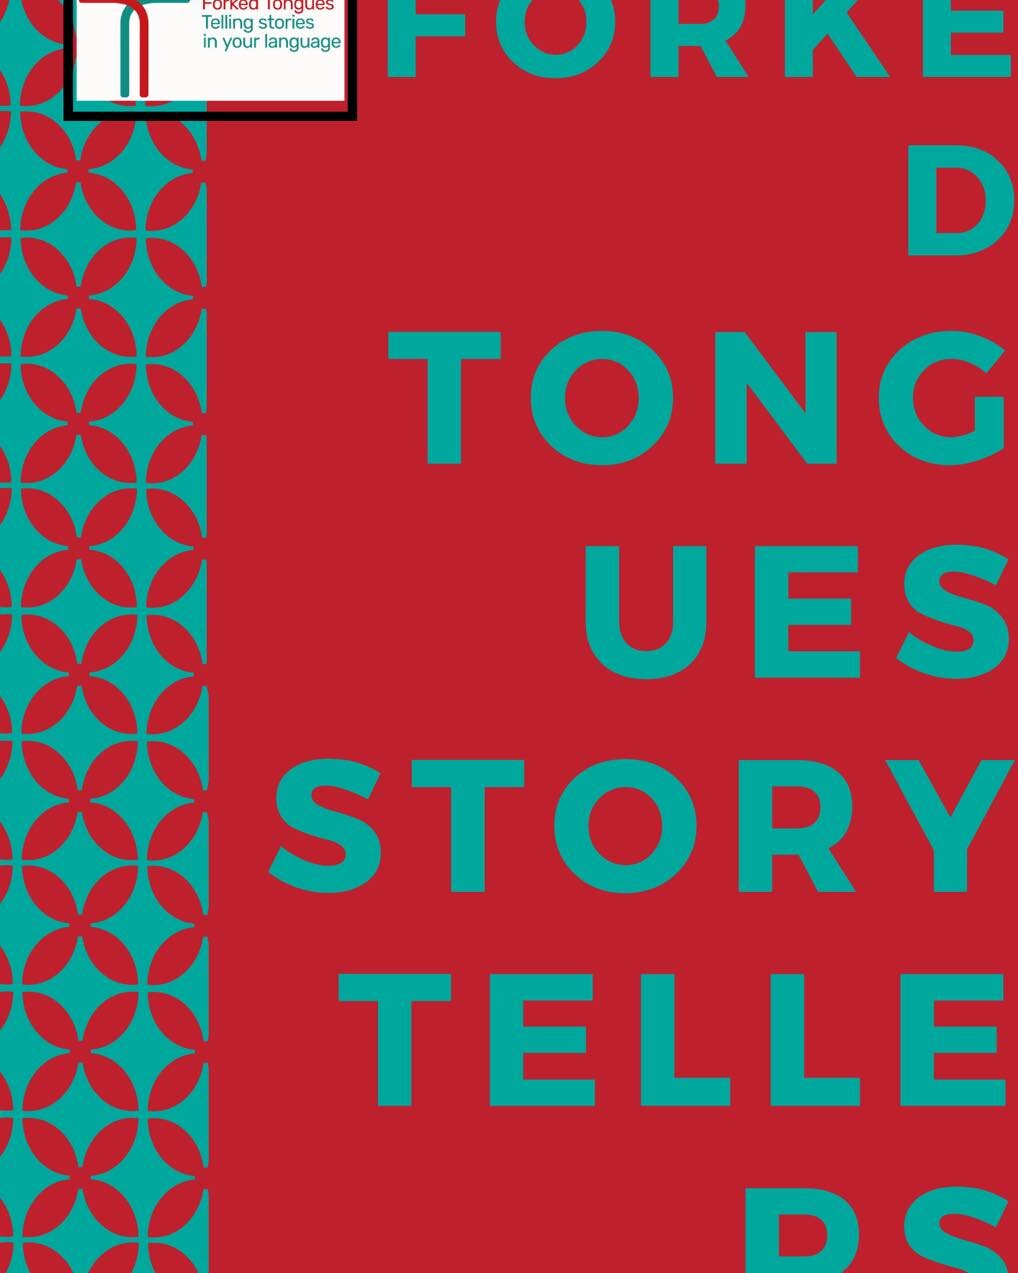 Our #ForkedTongues Storytellers are at it again! Join us at Think+DO Tank Foundation Community House Fairfield this Friday 11 Nov 3.30-5.30pm for a feast of Arabic storytelling for kids and families. Refreshments served. SBS Arabic24 will be there to